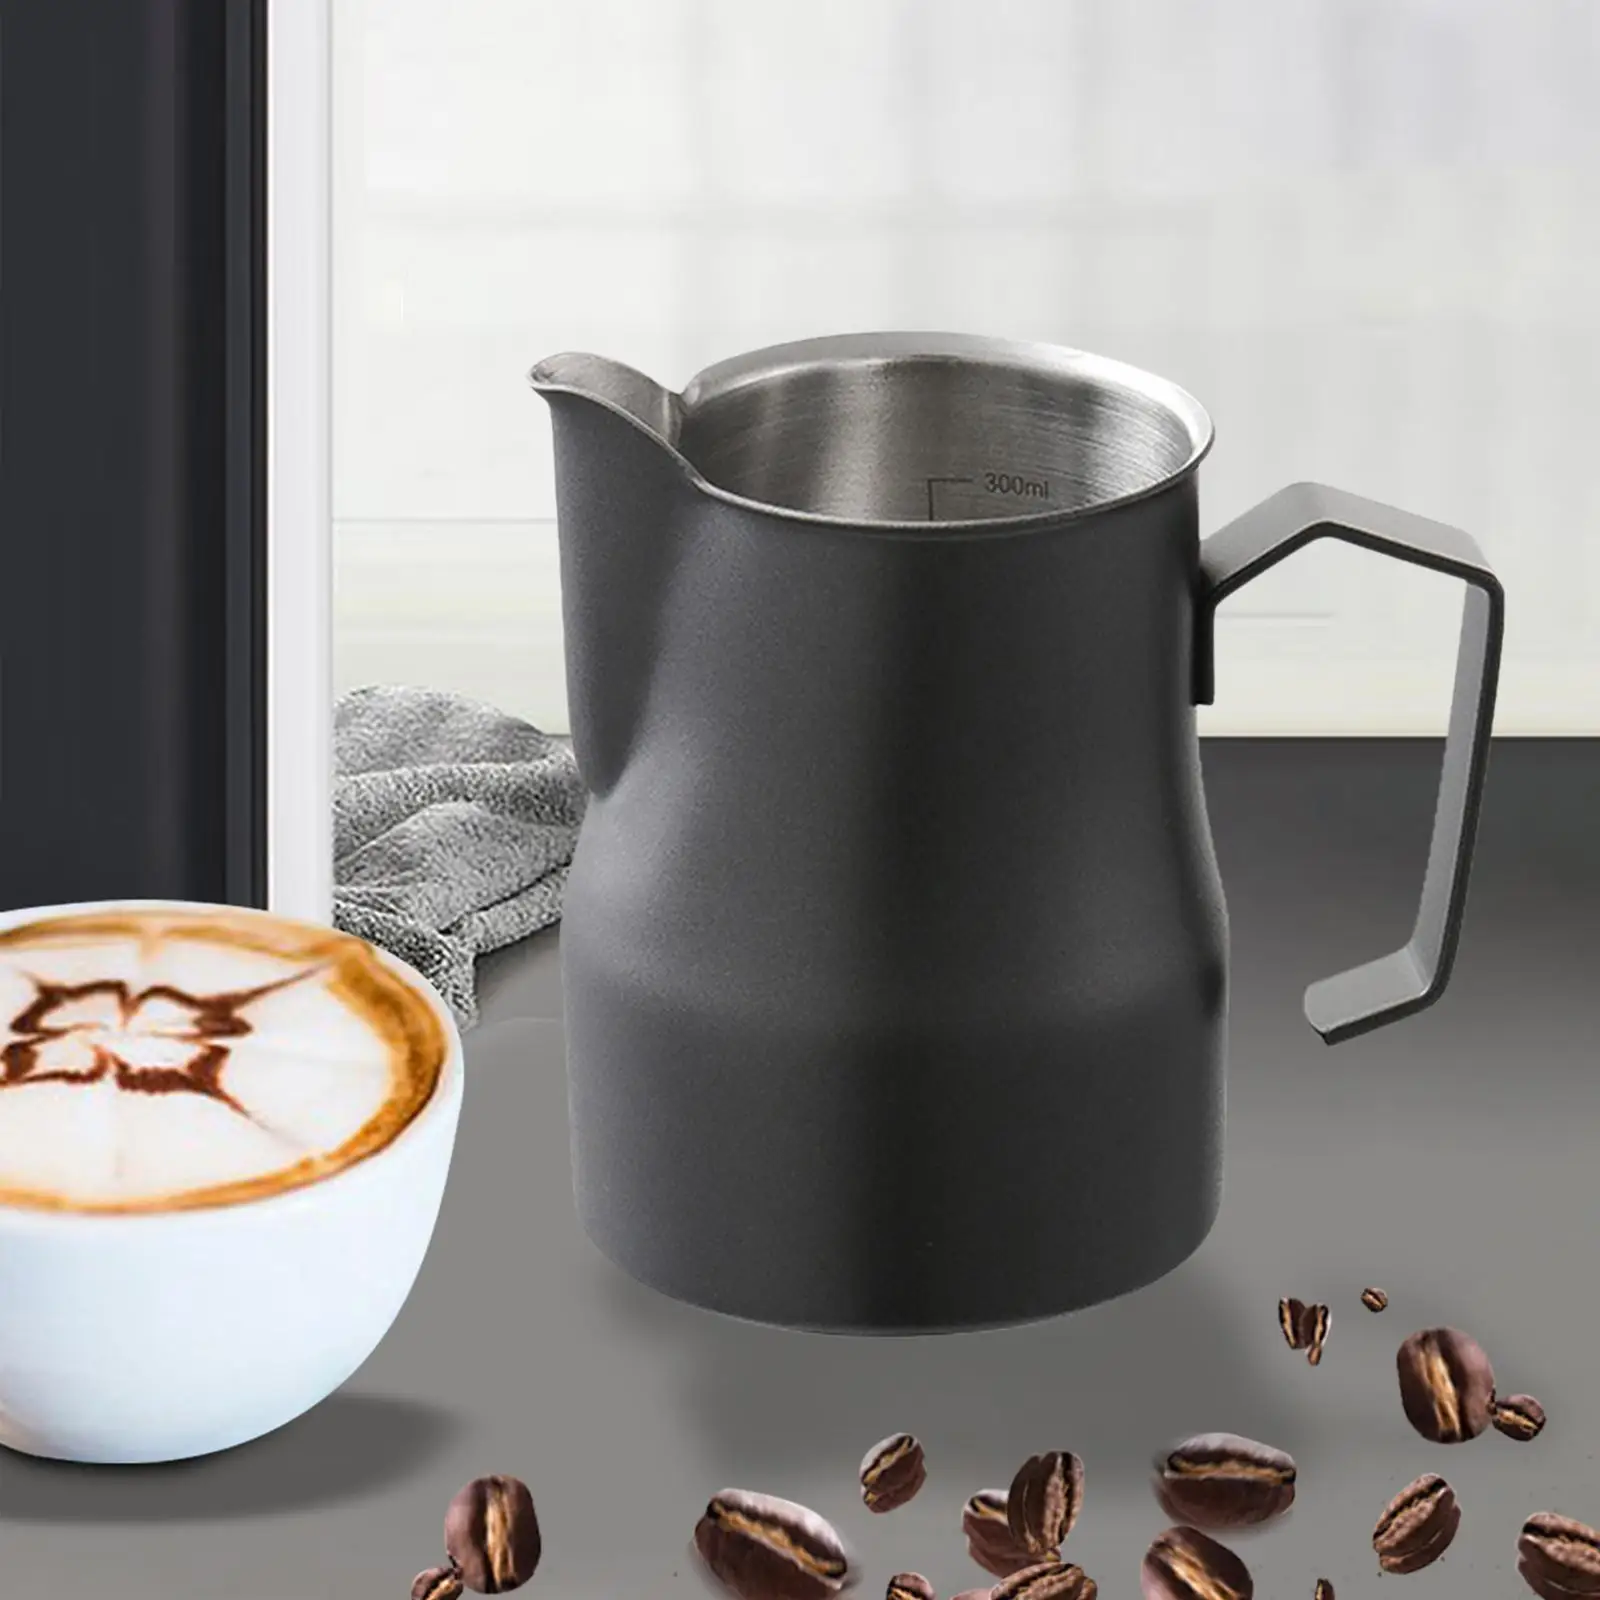 Milk Frothing Pitcher Stainless Steel Creamer Frothing Pitcher Espresso Steaming Pitcher for Lattes Cappuccino coffee